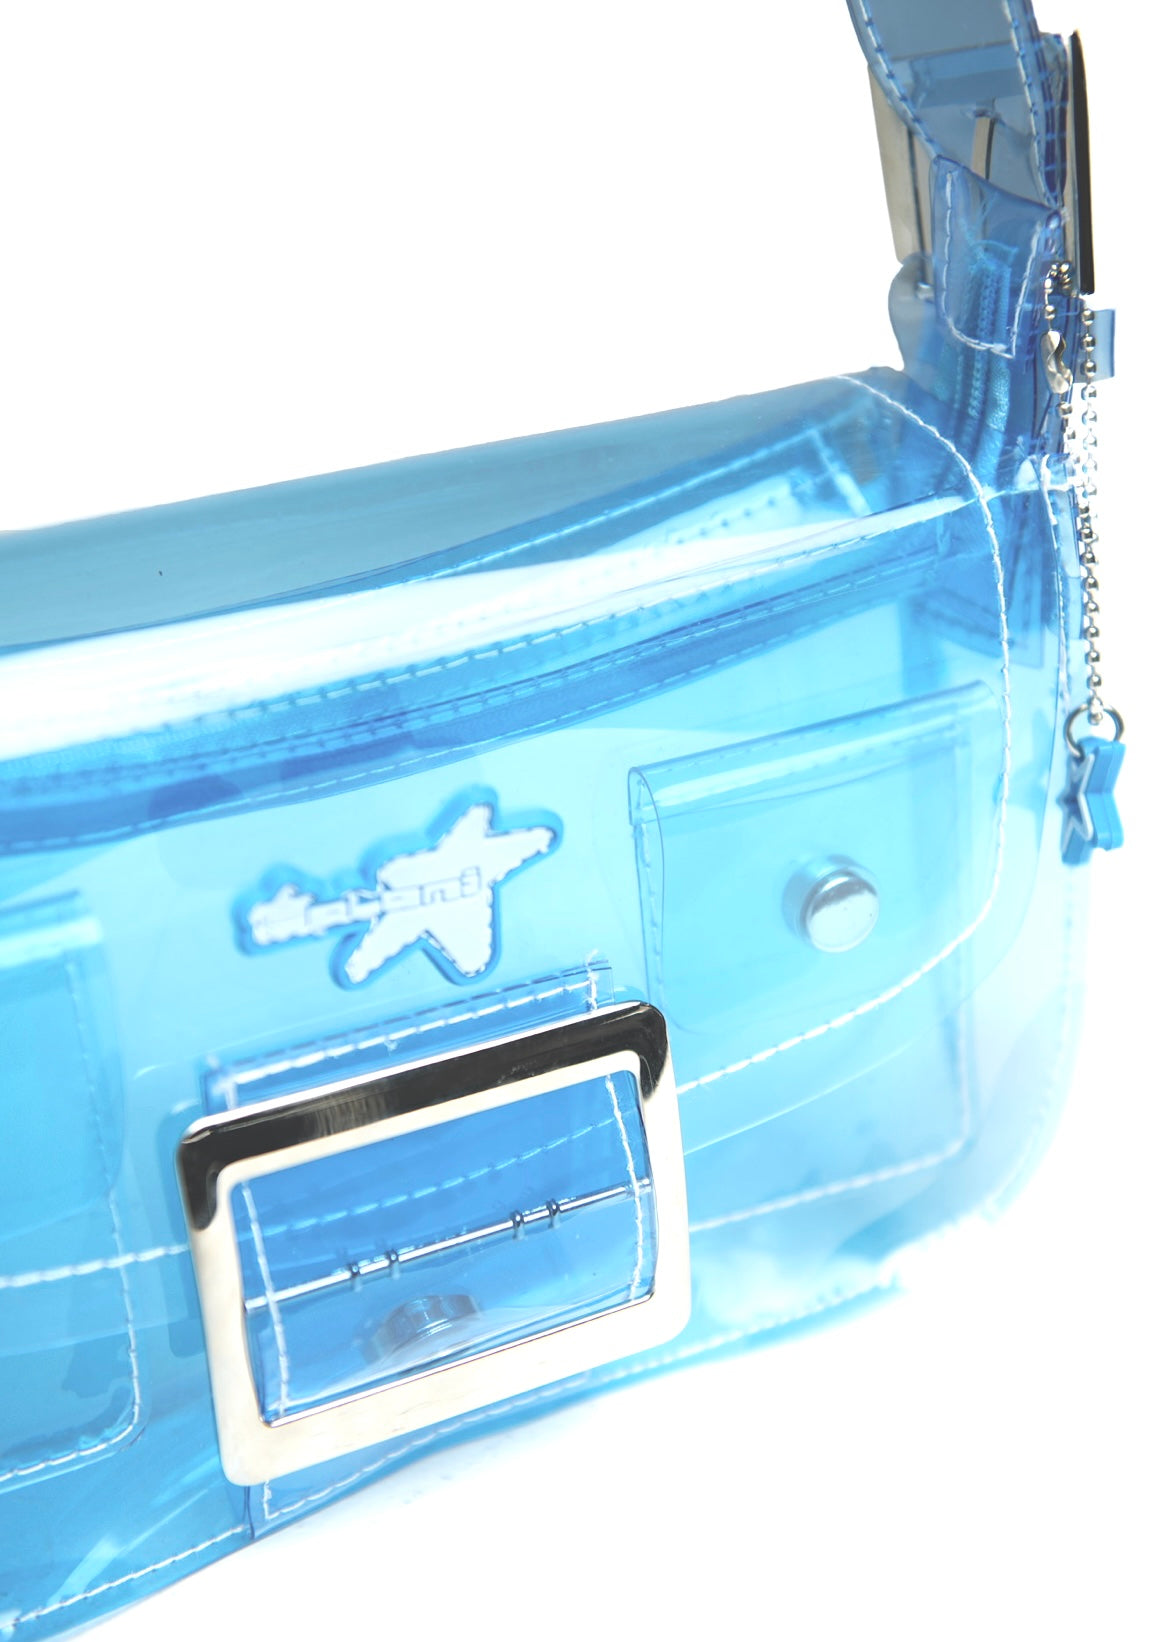 Solani Blue Jelly Bag *Preorder*